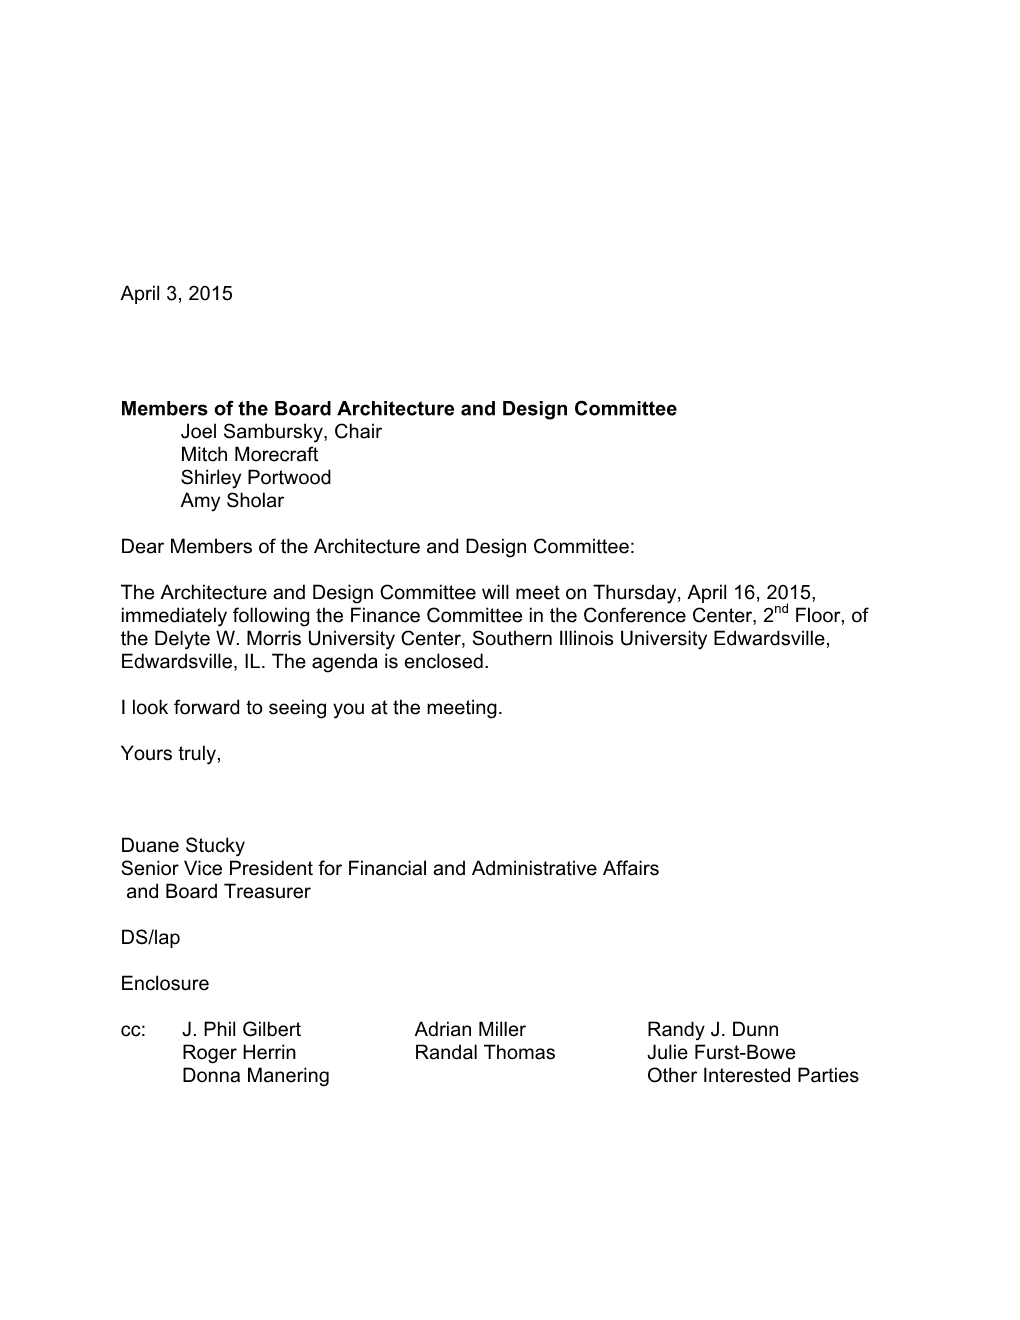 April 3, 2015 Members of the Board Architecture and Design Committee